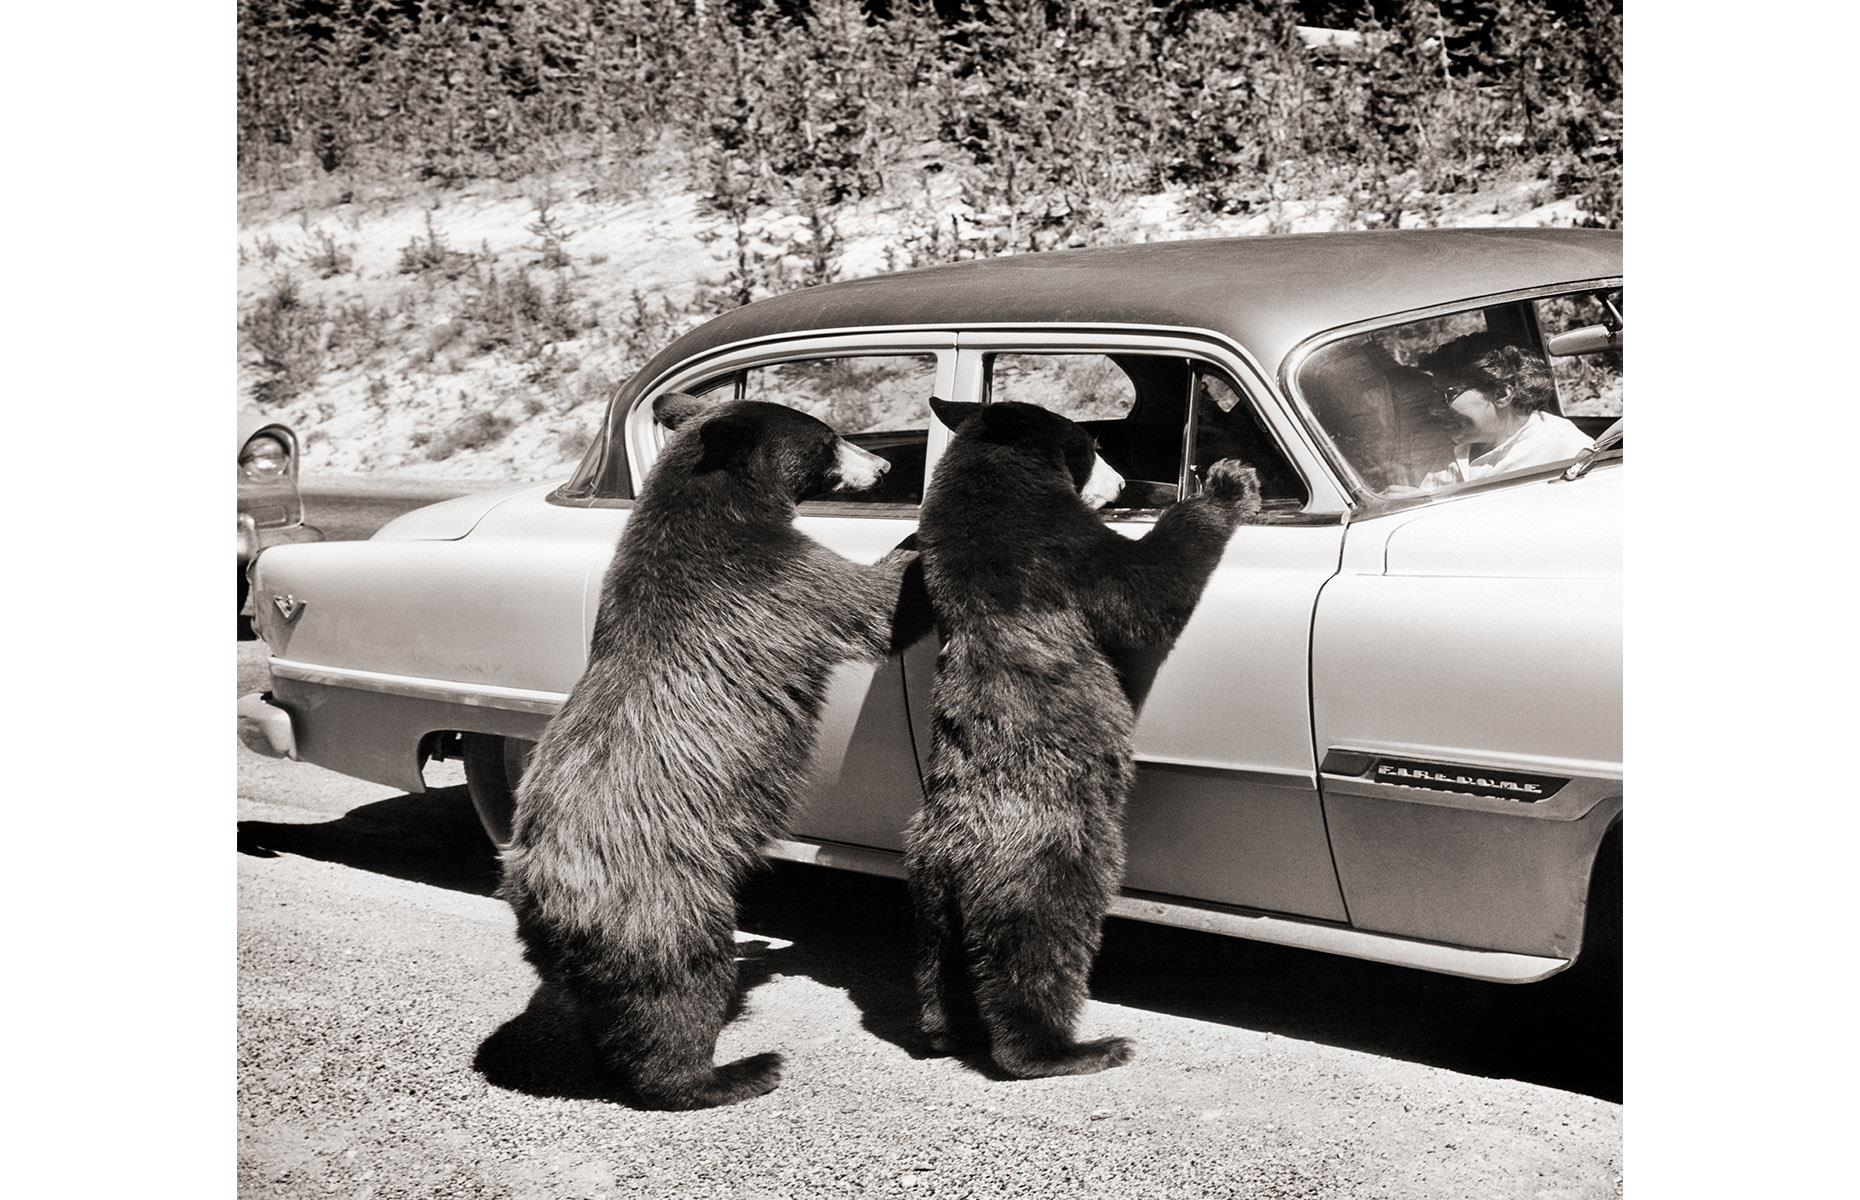 Bear safety at Yellowstone was taken much less seriously in earlier decades too. In fact, it was common for motorists to wind down their windows as bears approached or even hop out of their cars and attempt to feed the creatures.